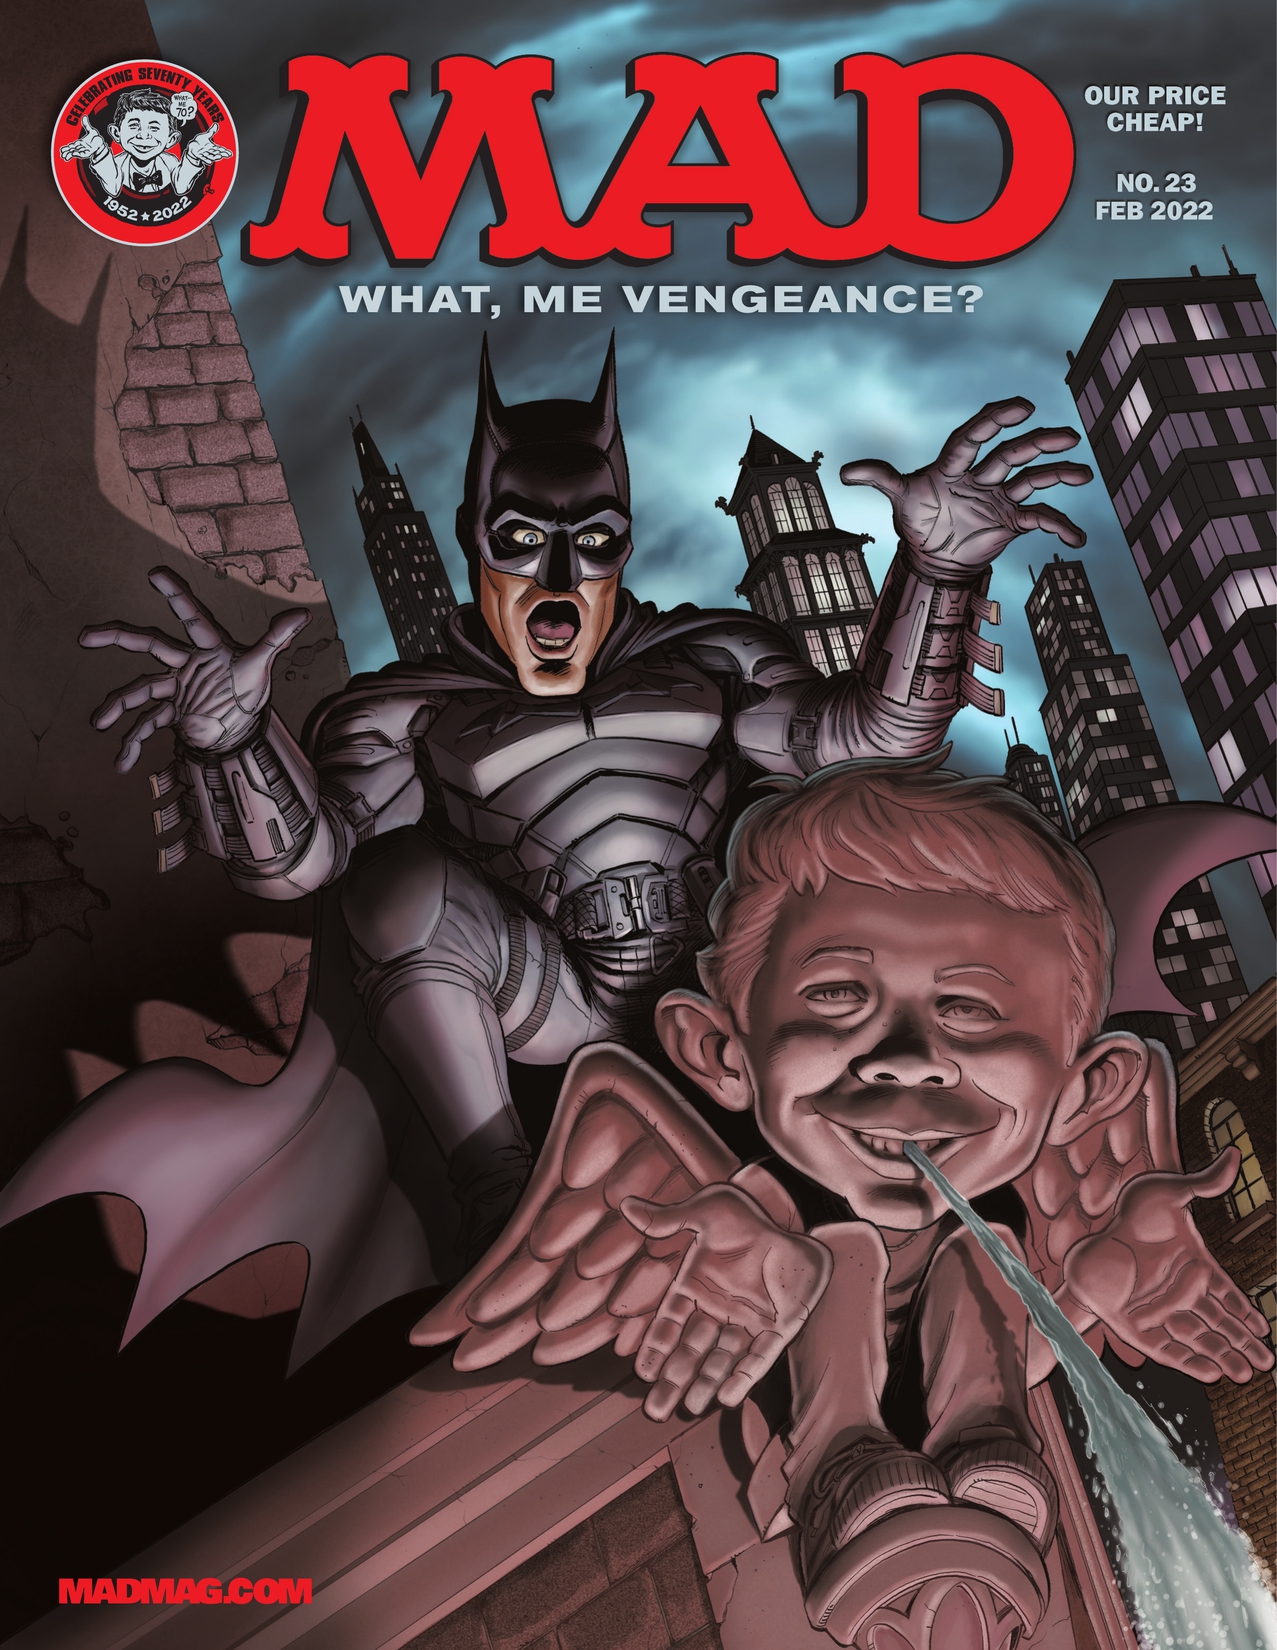 MAD Magazine (2018-) #23 preview images